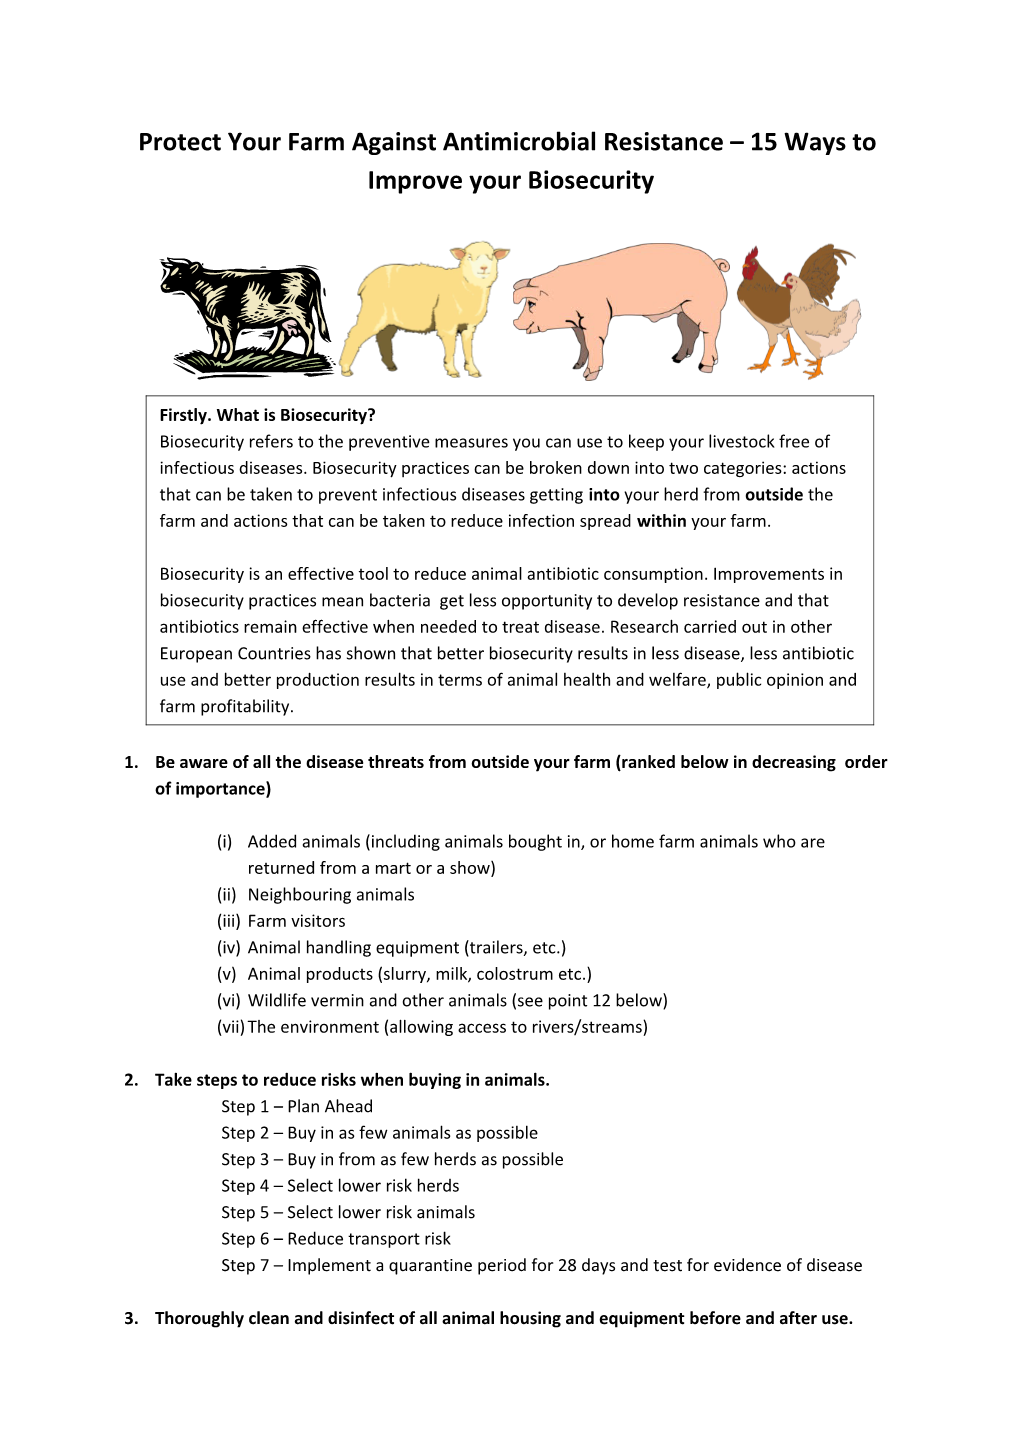 Protect Your Farm Against Antimicrobial Resistance 15 Ways To